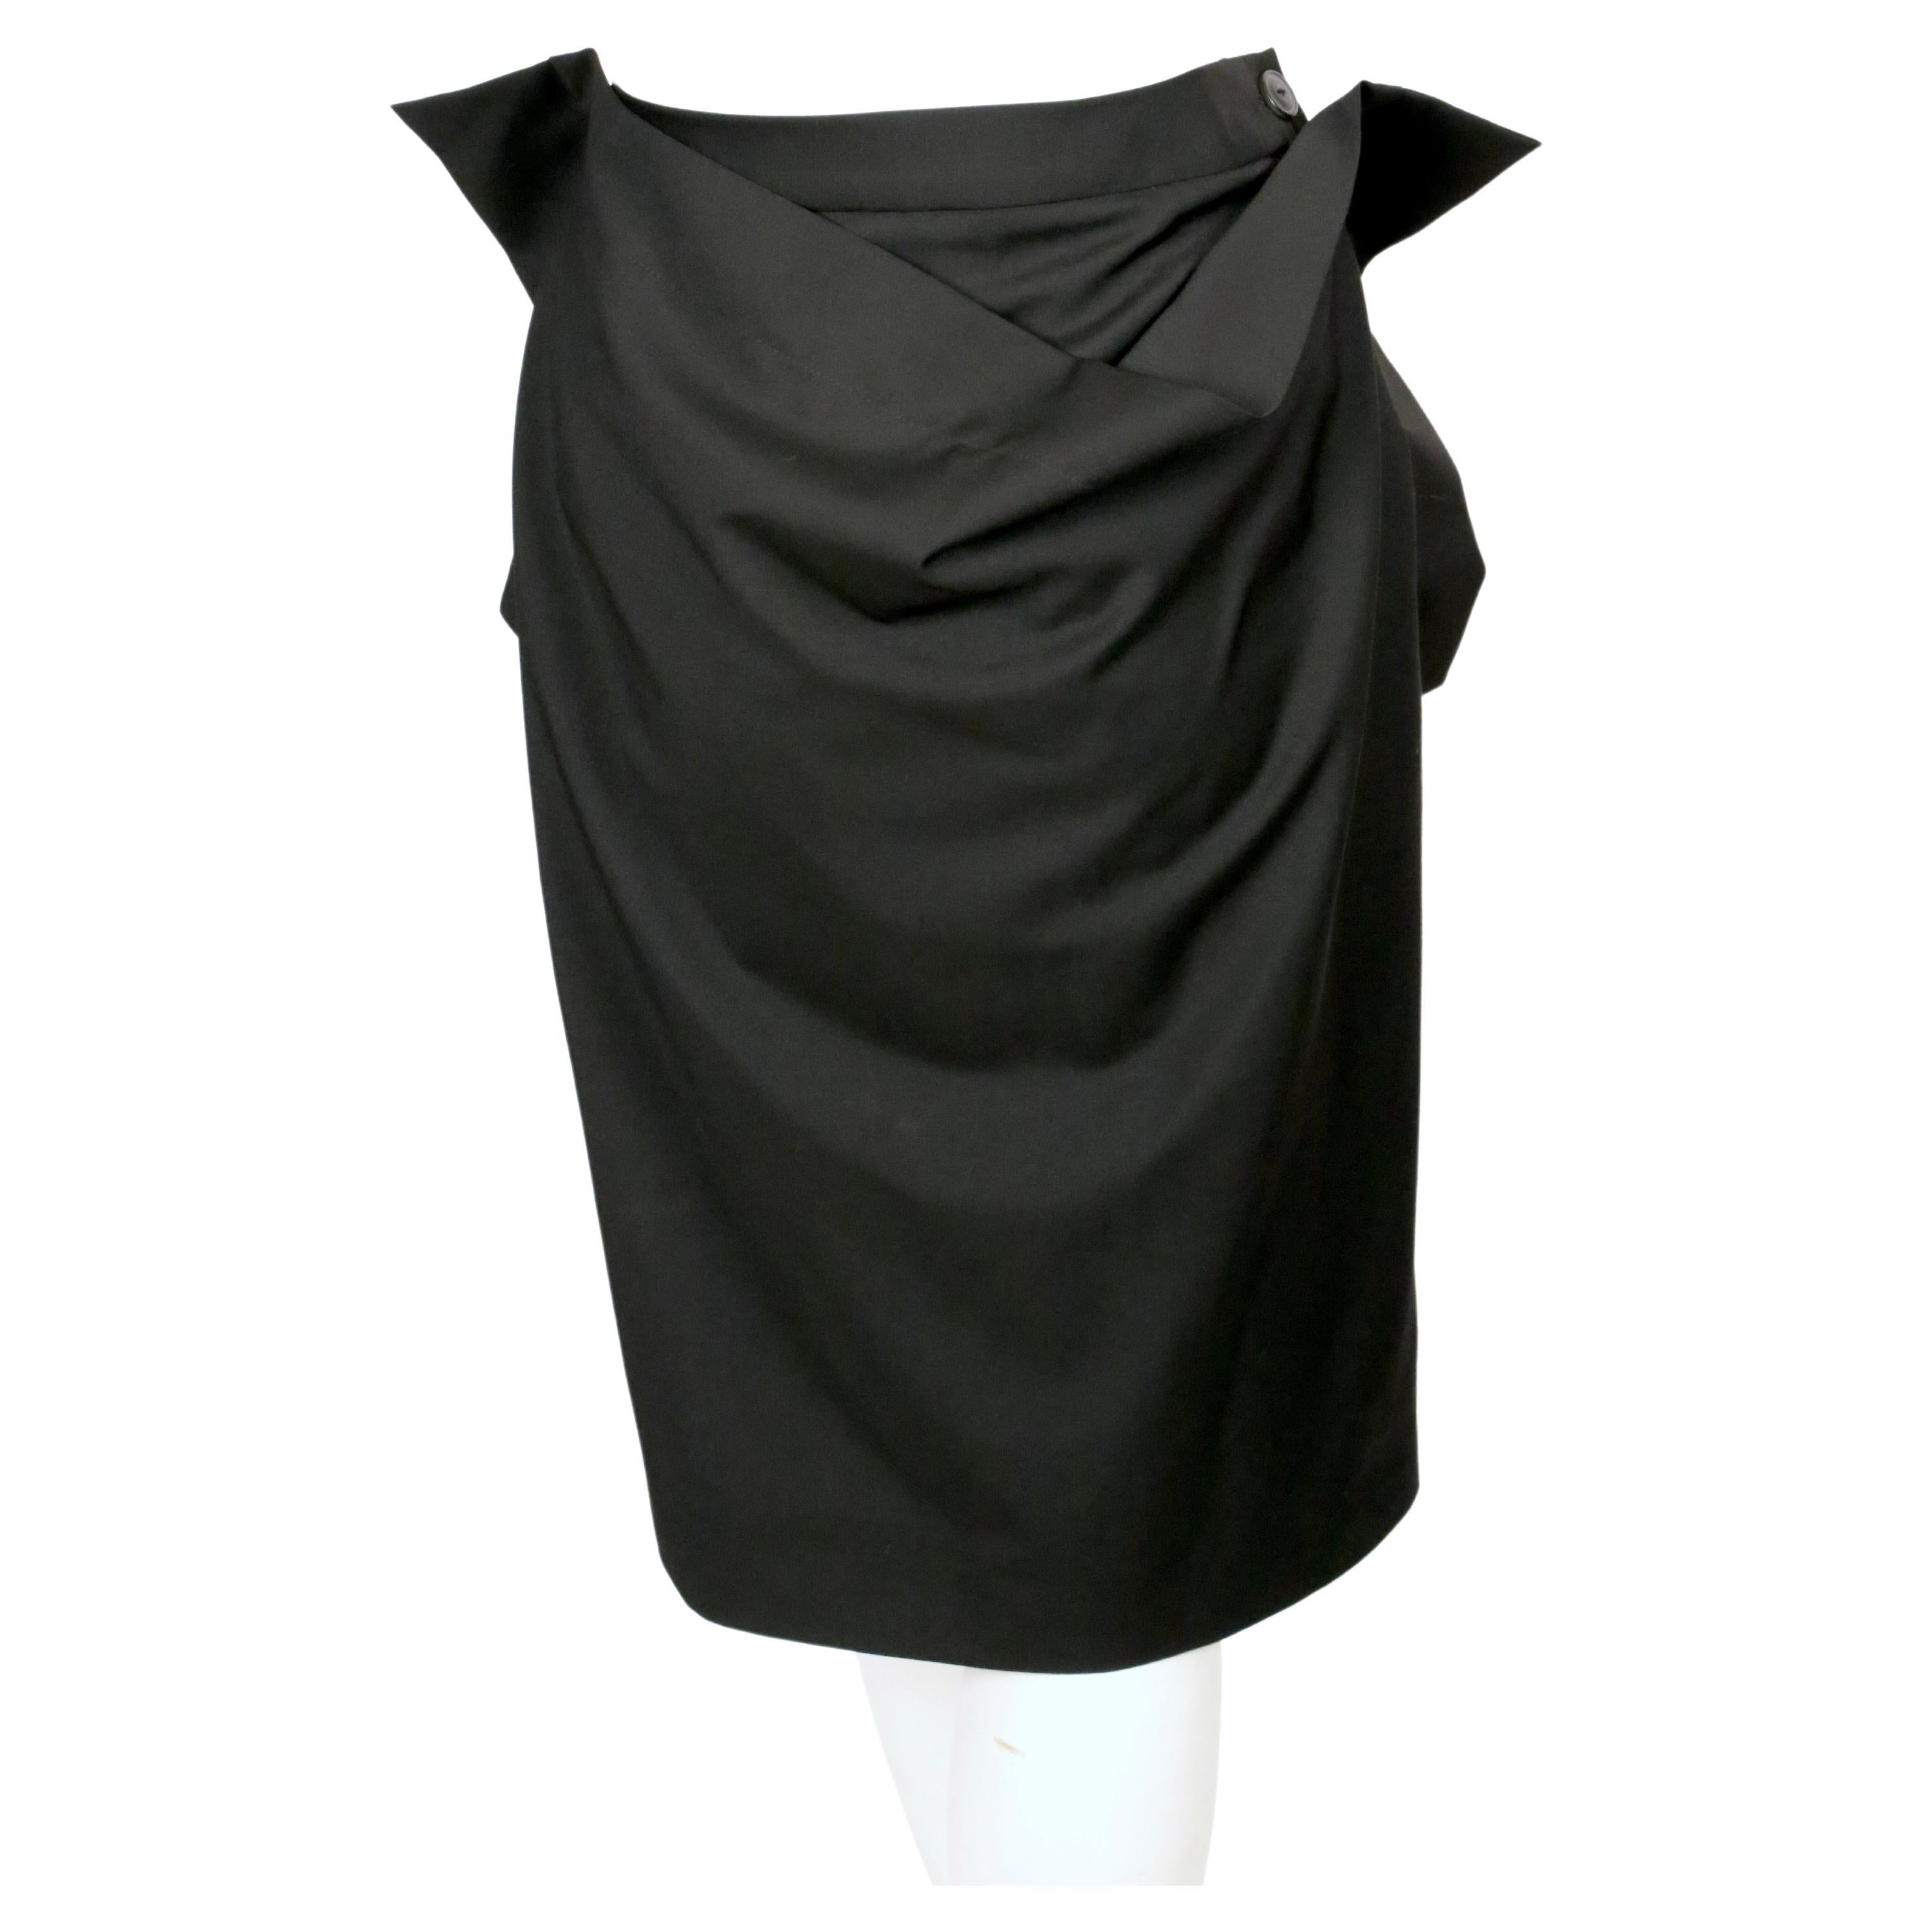 VIVIENNE WESTWOOD black draped top and skirt suit For Sale 5